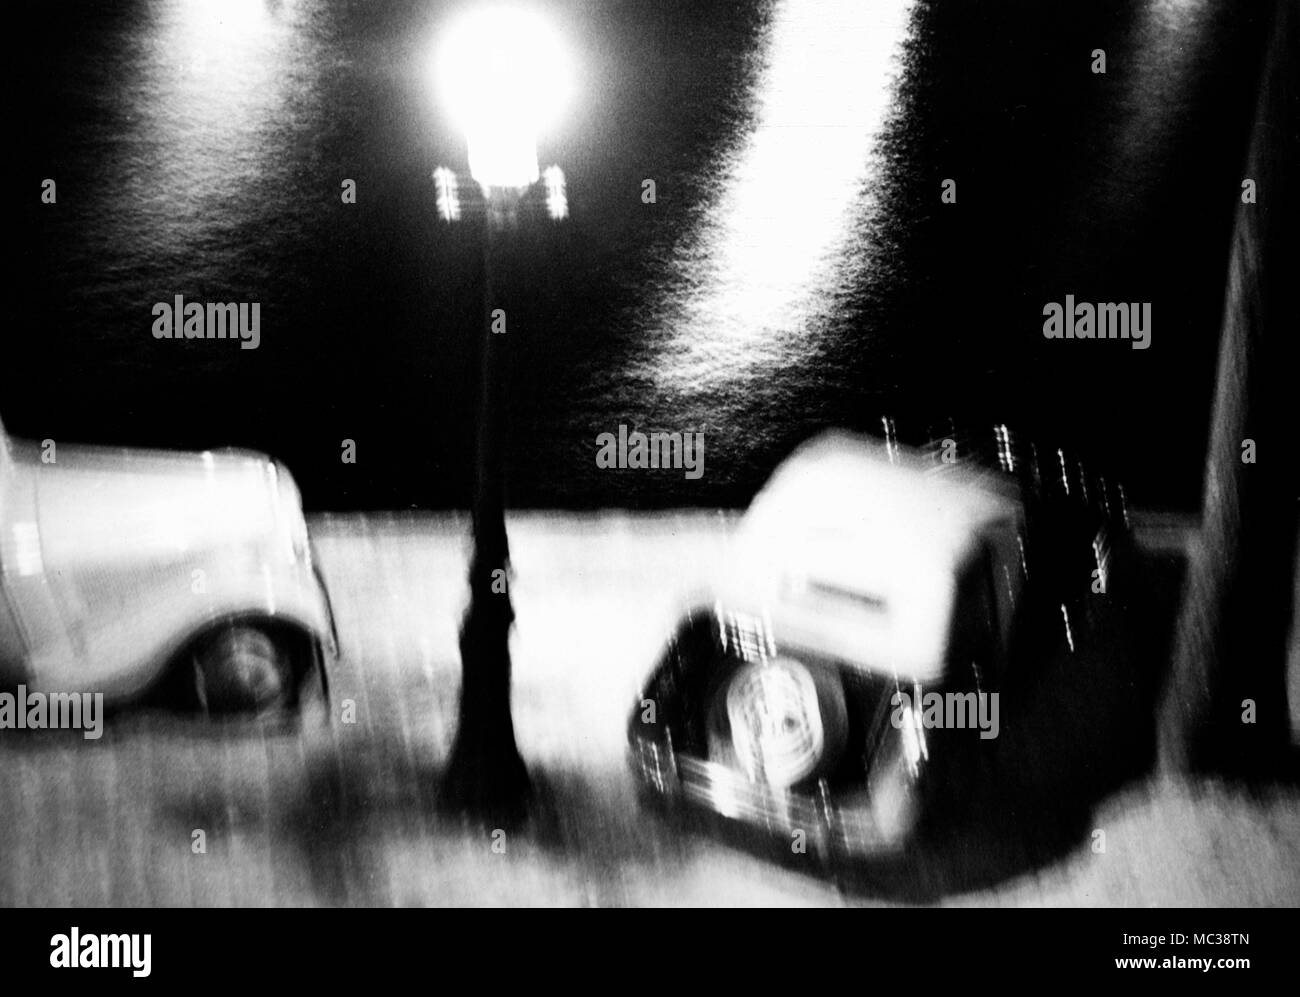 Abstract riverside view of automobiles under a street lamp in France, ca. 1938. Stock Photo